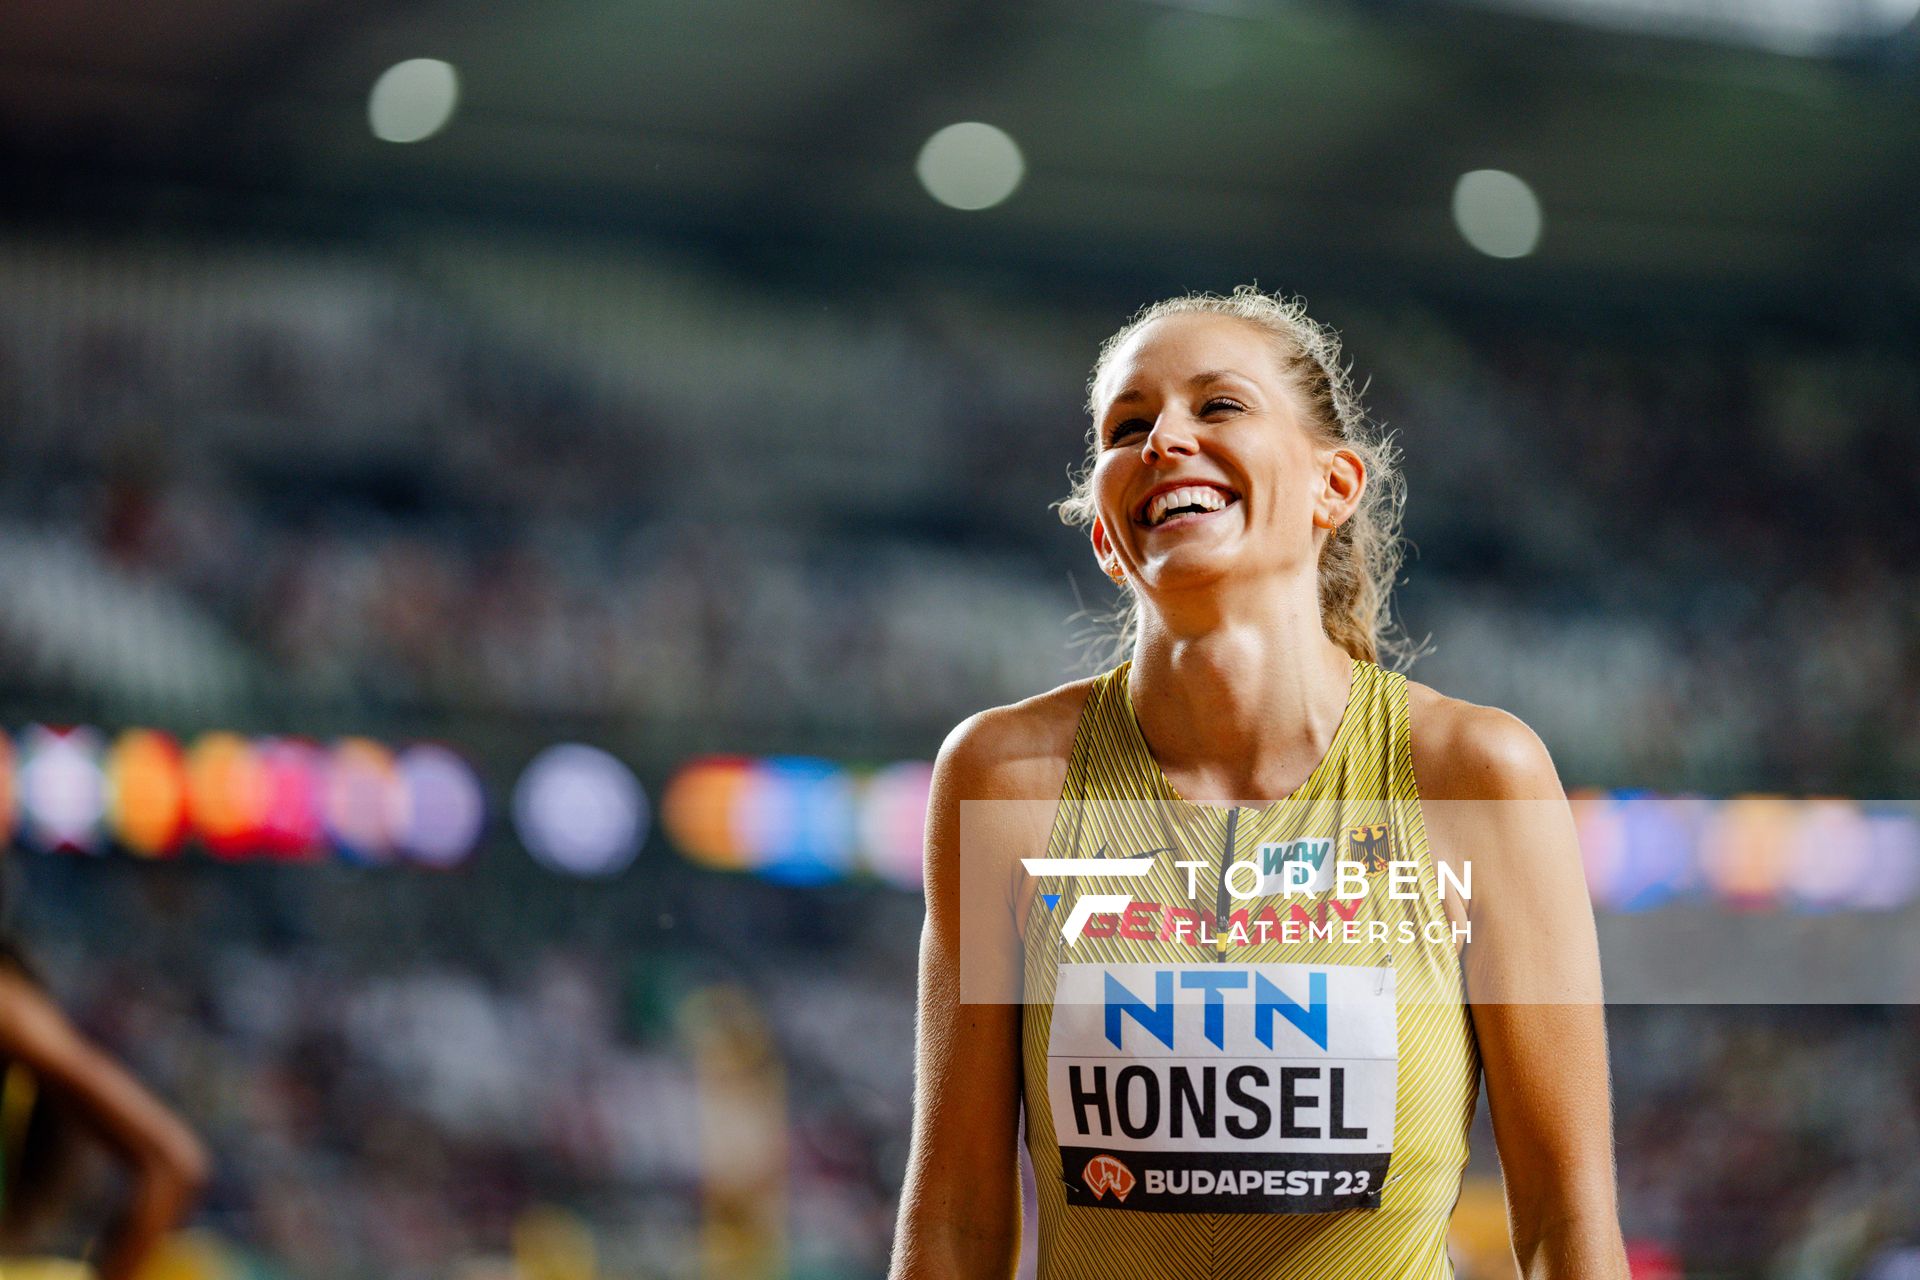 Christina Honsel (GER/Germany) during the High Jump Final on Day 9 of the World Athletics Championships Budapest 23 at the National Athletics Centre in Budapest, Hungary on August 27, 2023.